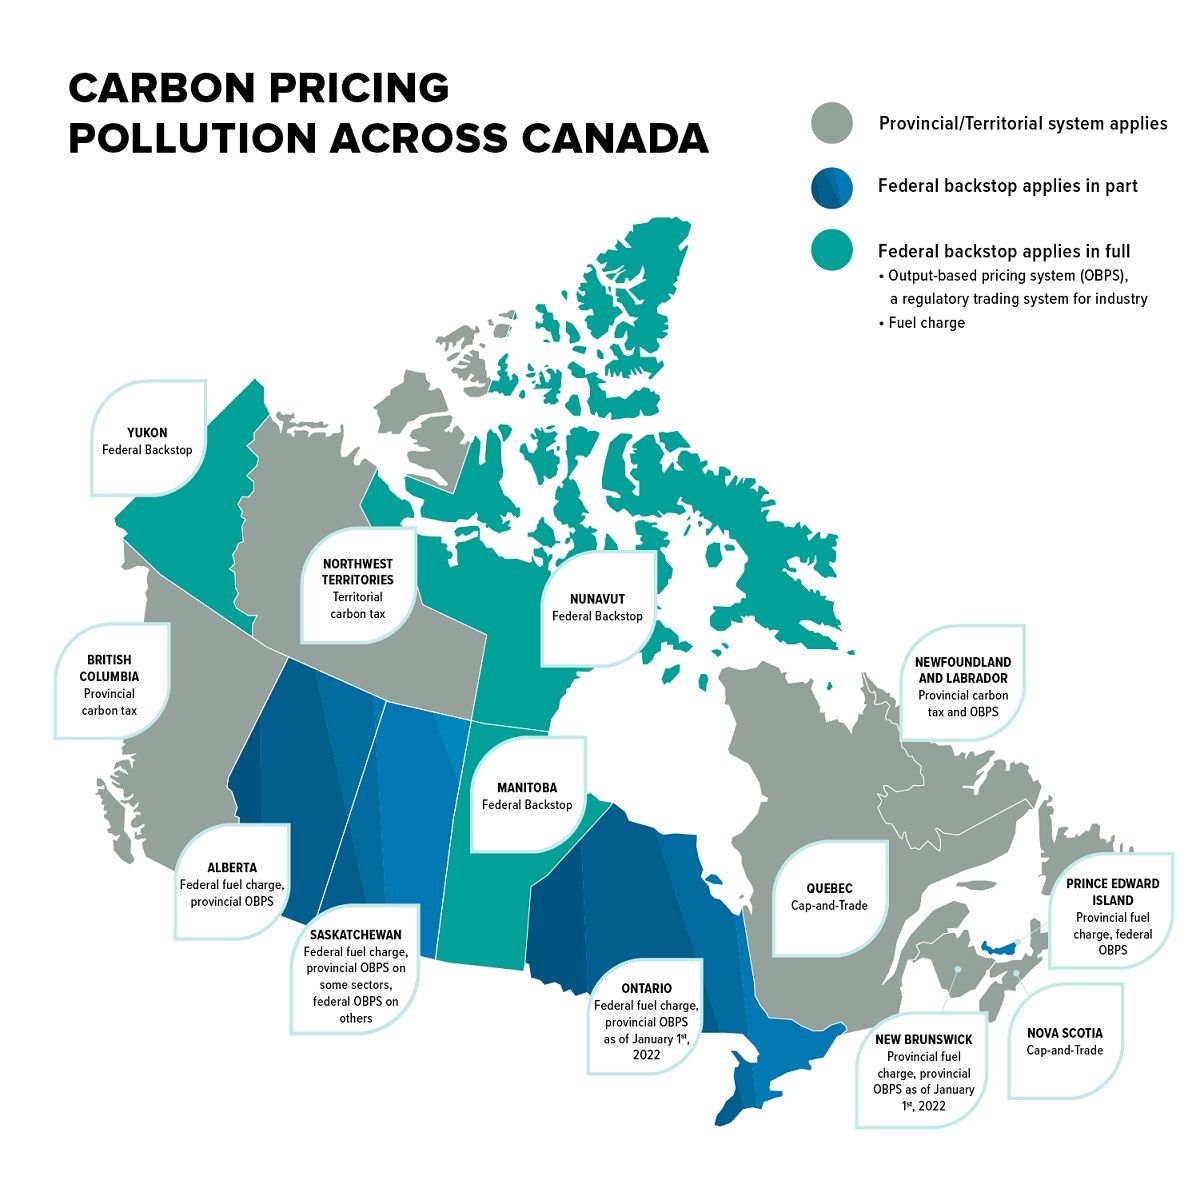 Carbon pricing across Canada